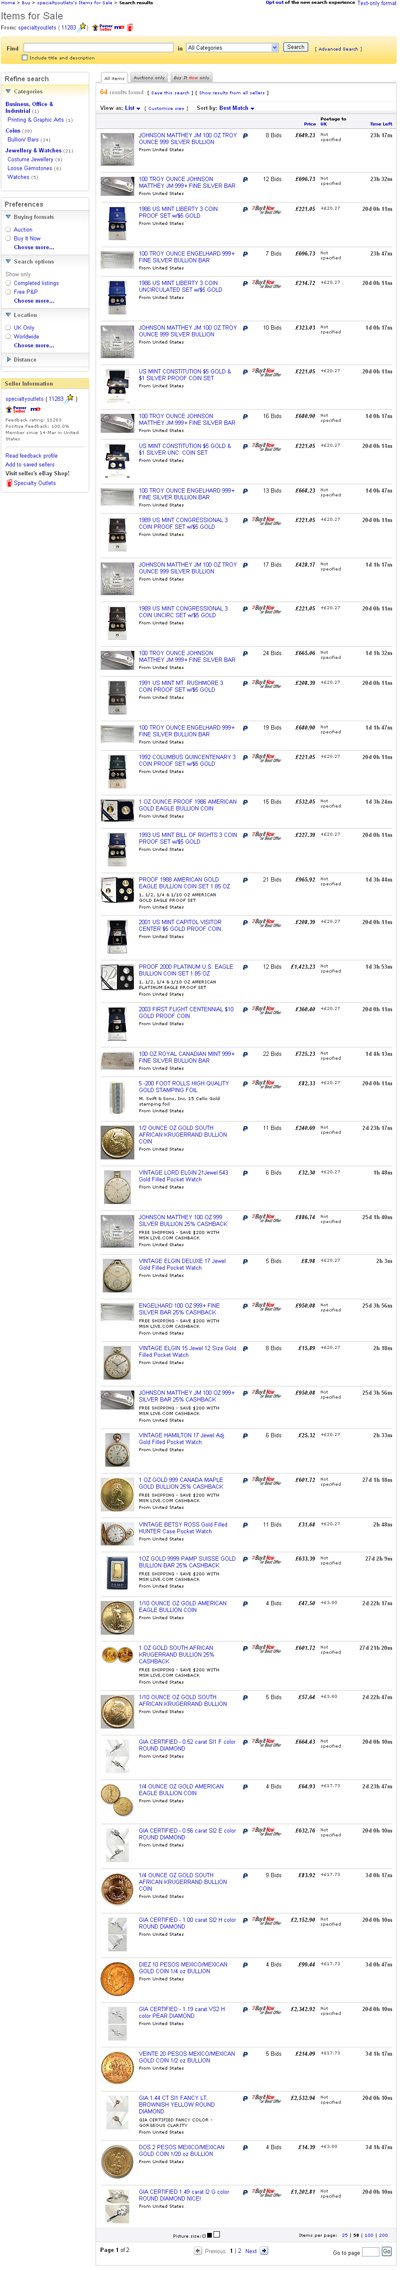 SpecialtyOutlets eBay Listings Using 3 of our Images